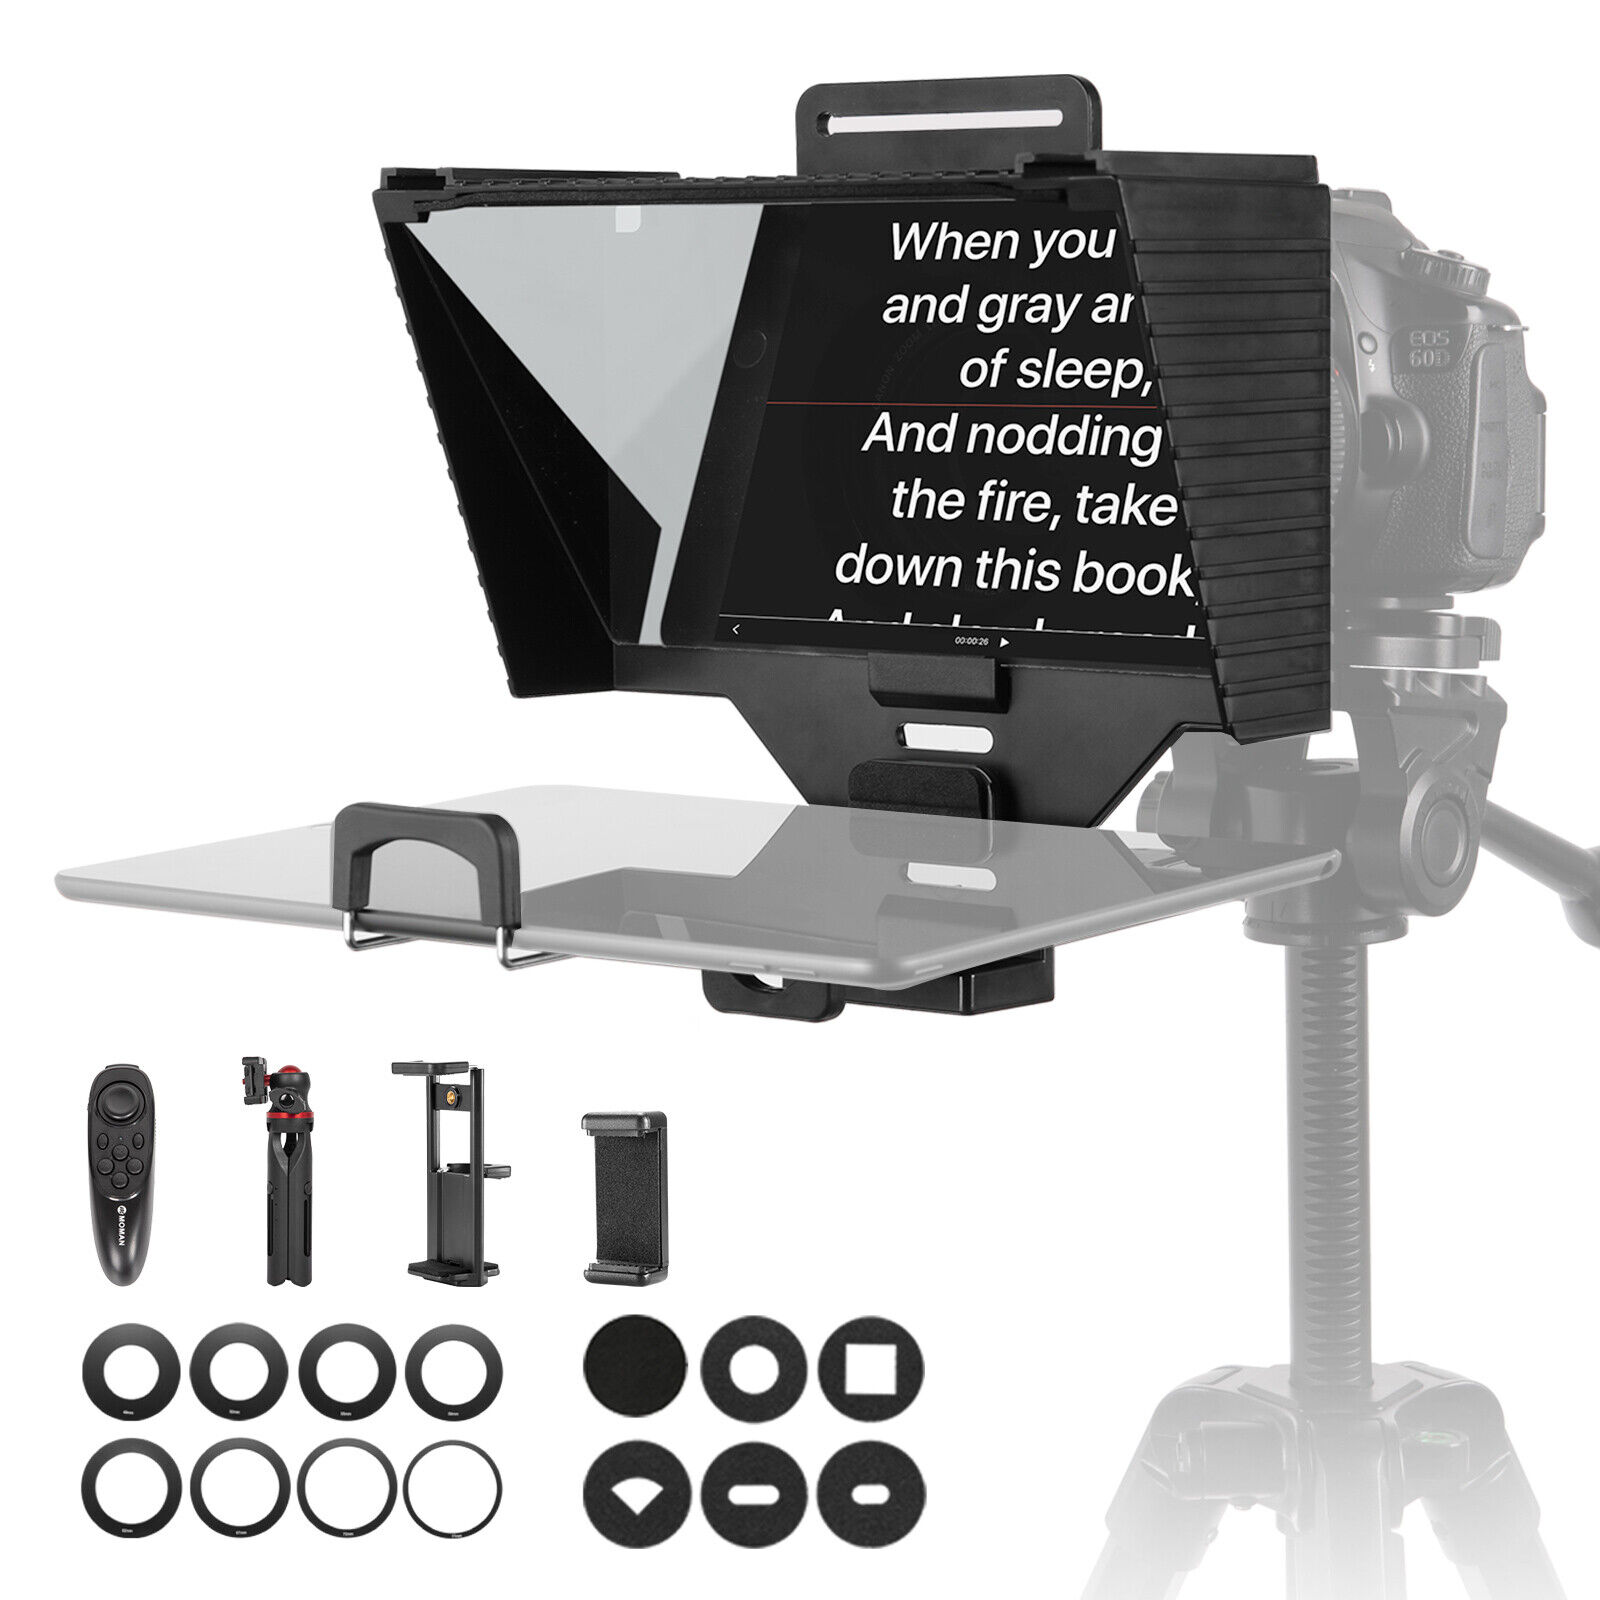 Moman Teleprompters With Tripod 70/30 Beam Split Glass For Dslr Camera Recording